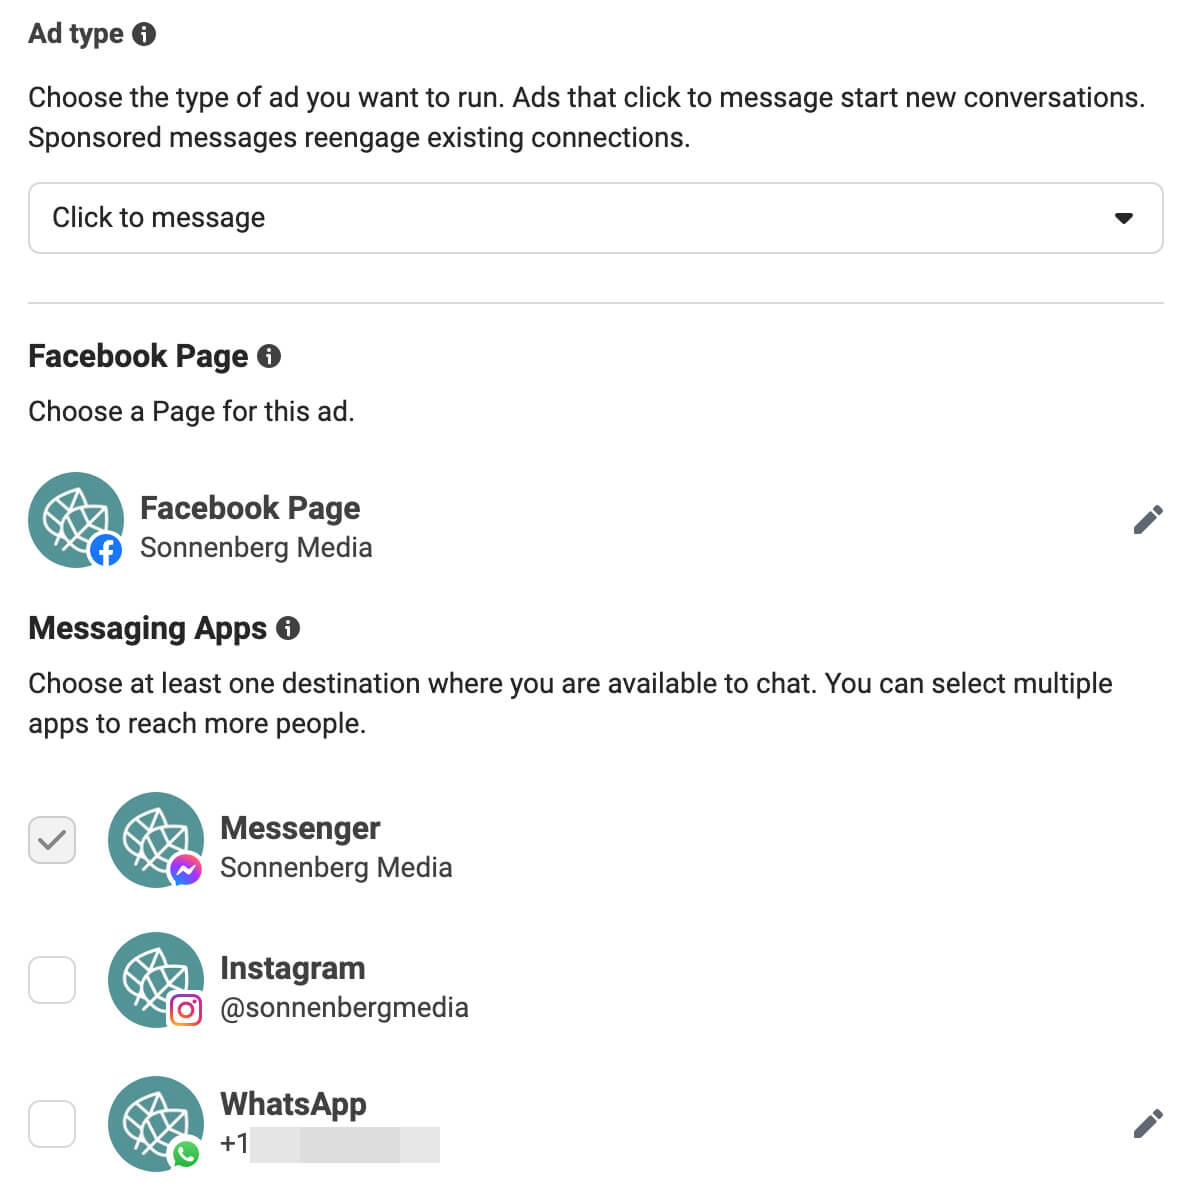 how-to-run-engagement-ads-on-facebook-objective-messaging-apps-for-conversion-location-messenger-instagram-whatsapp-example-16